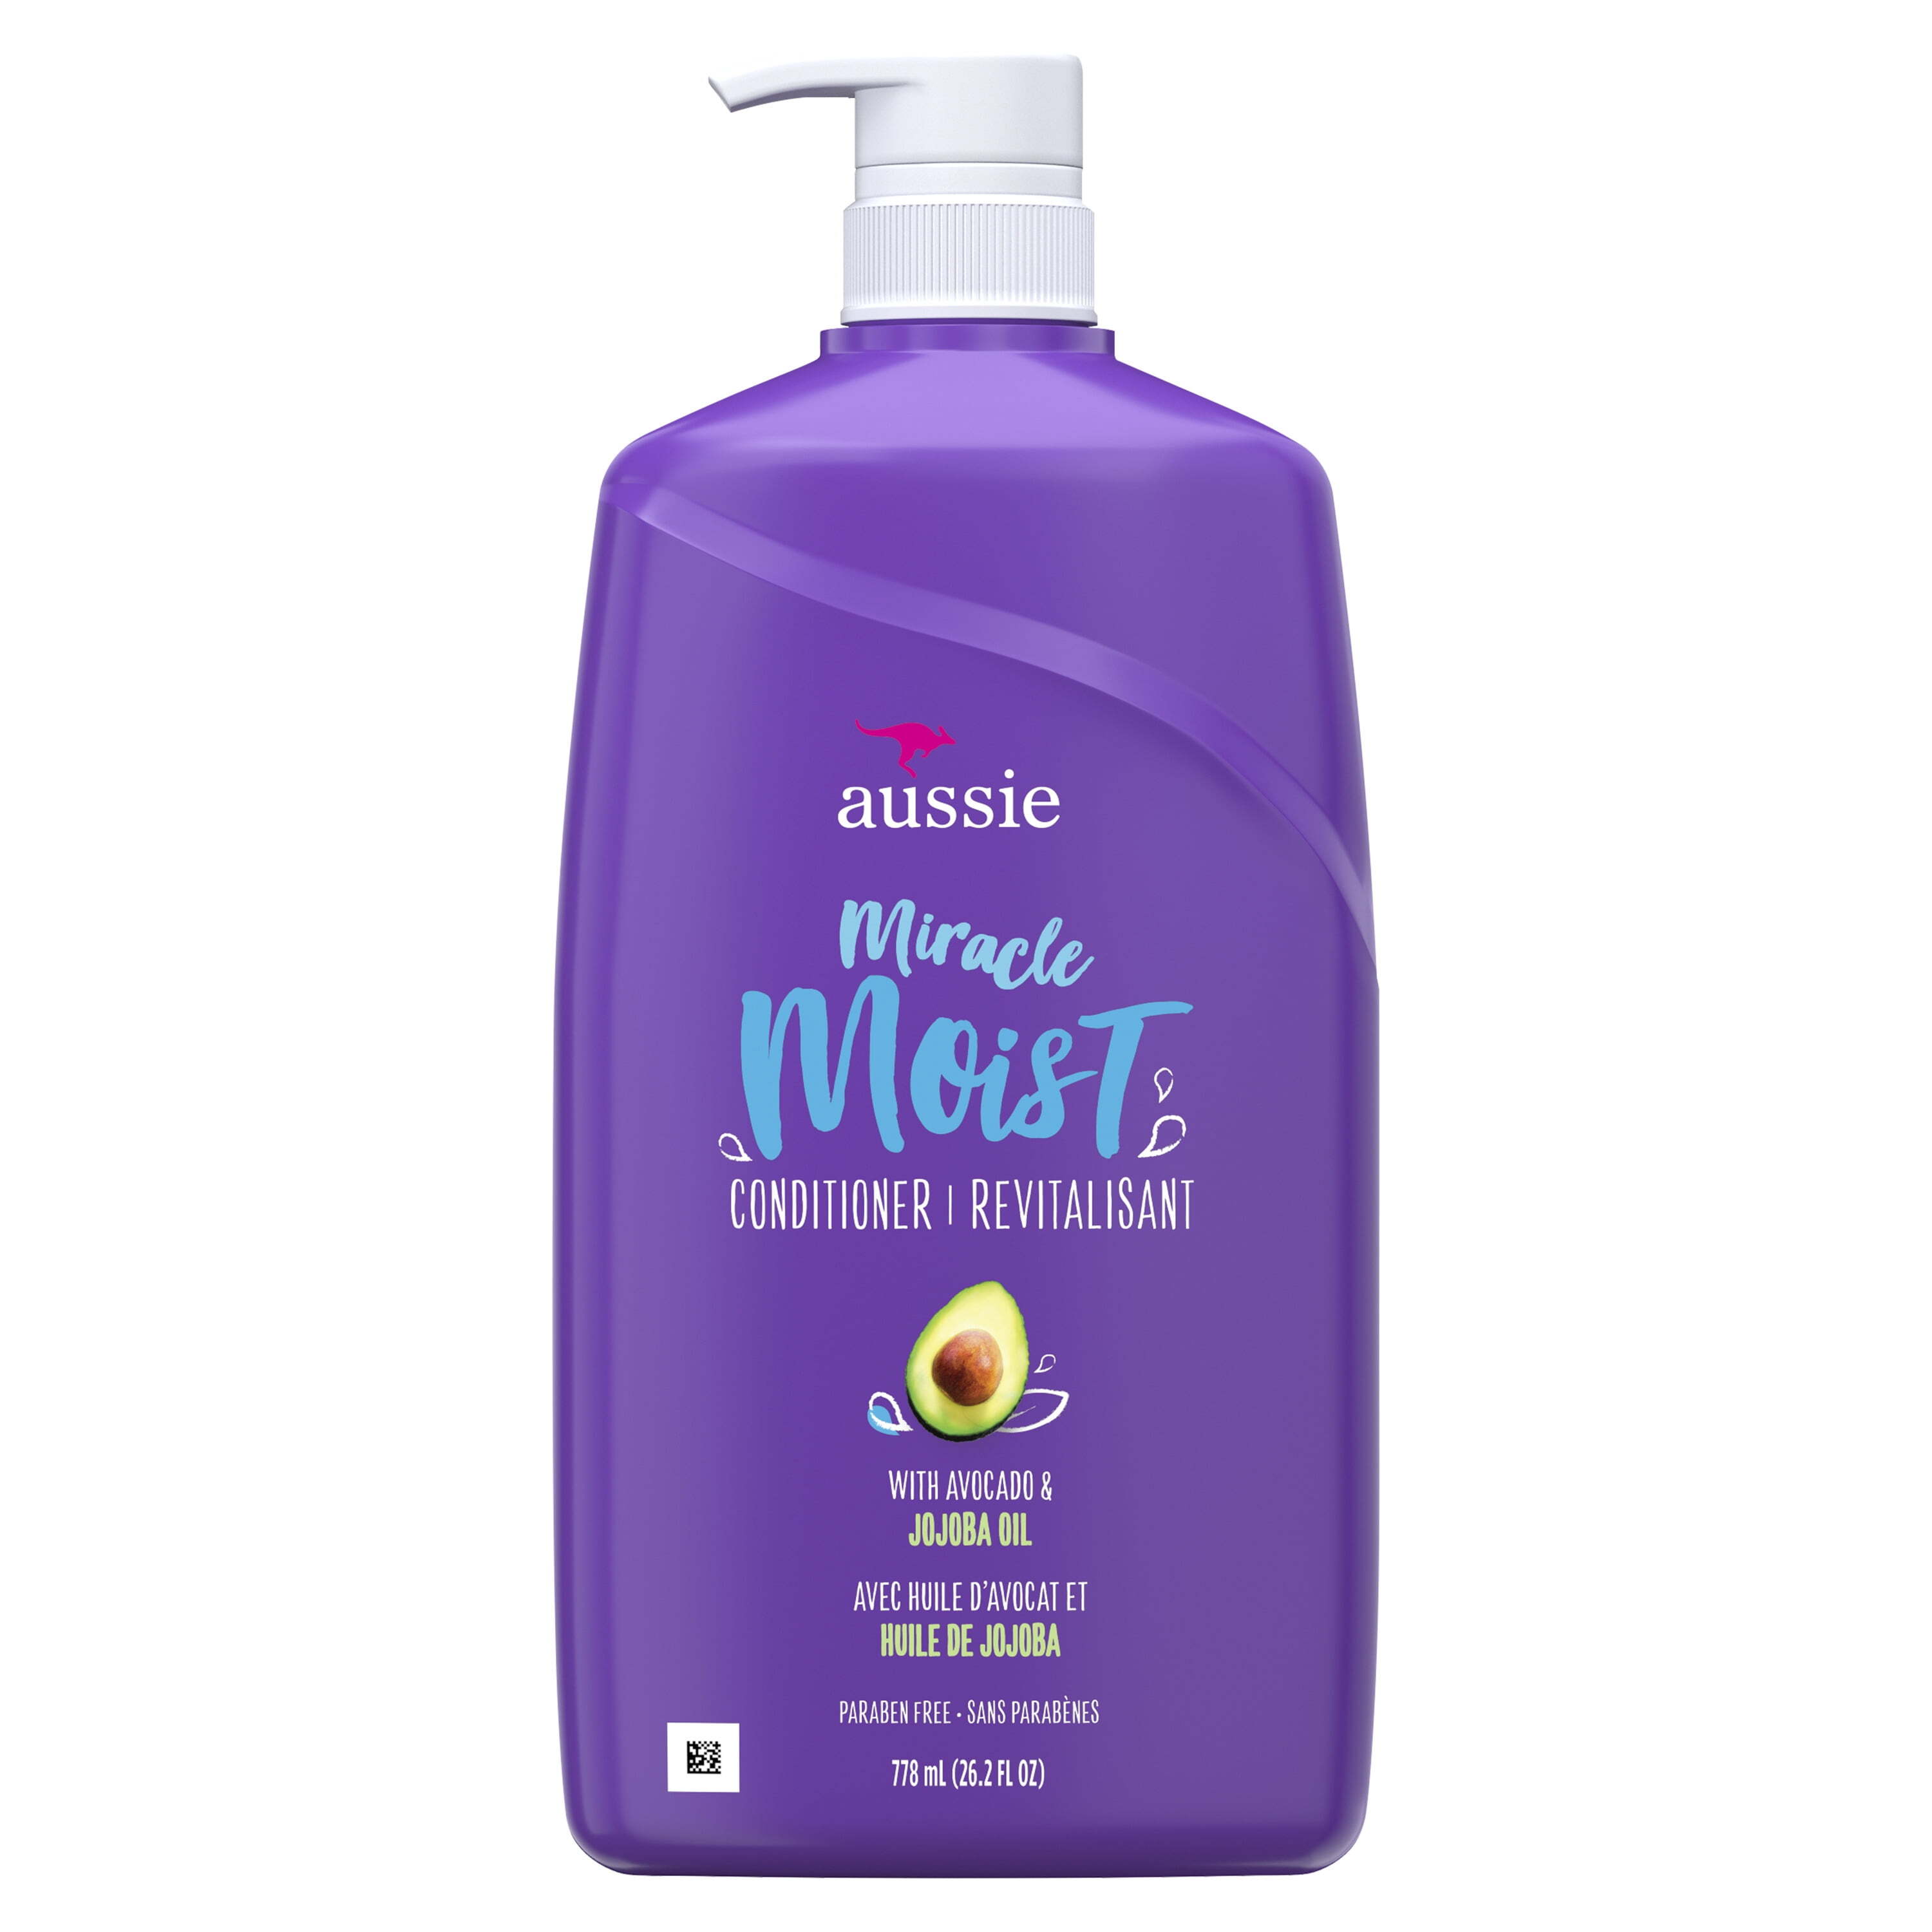 Aussie Miracle Moist Conditioner with Avocado, Paraben Free, For Dry Hair Types, 26.2 oz - image 1 of 9